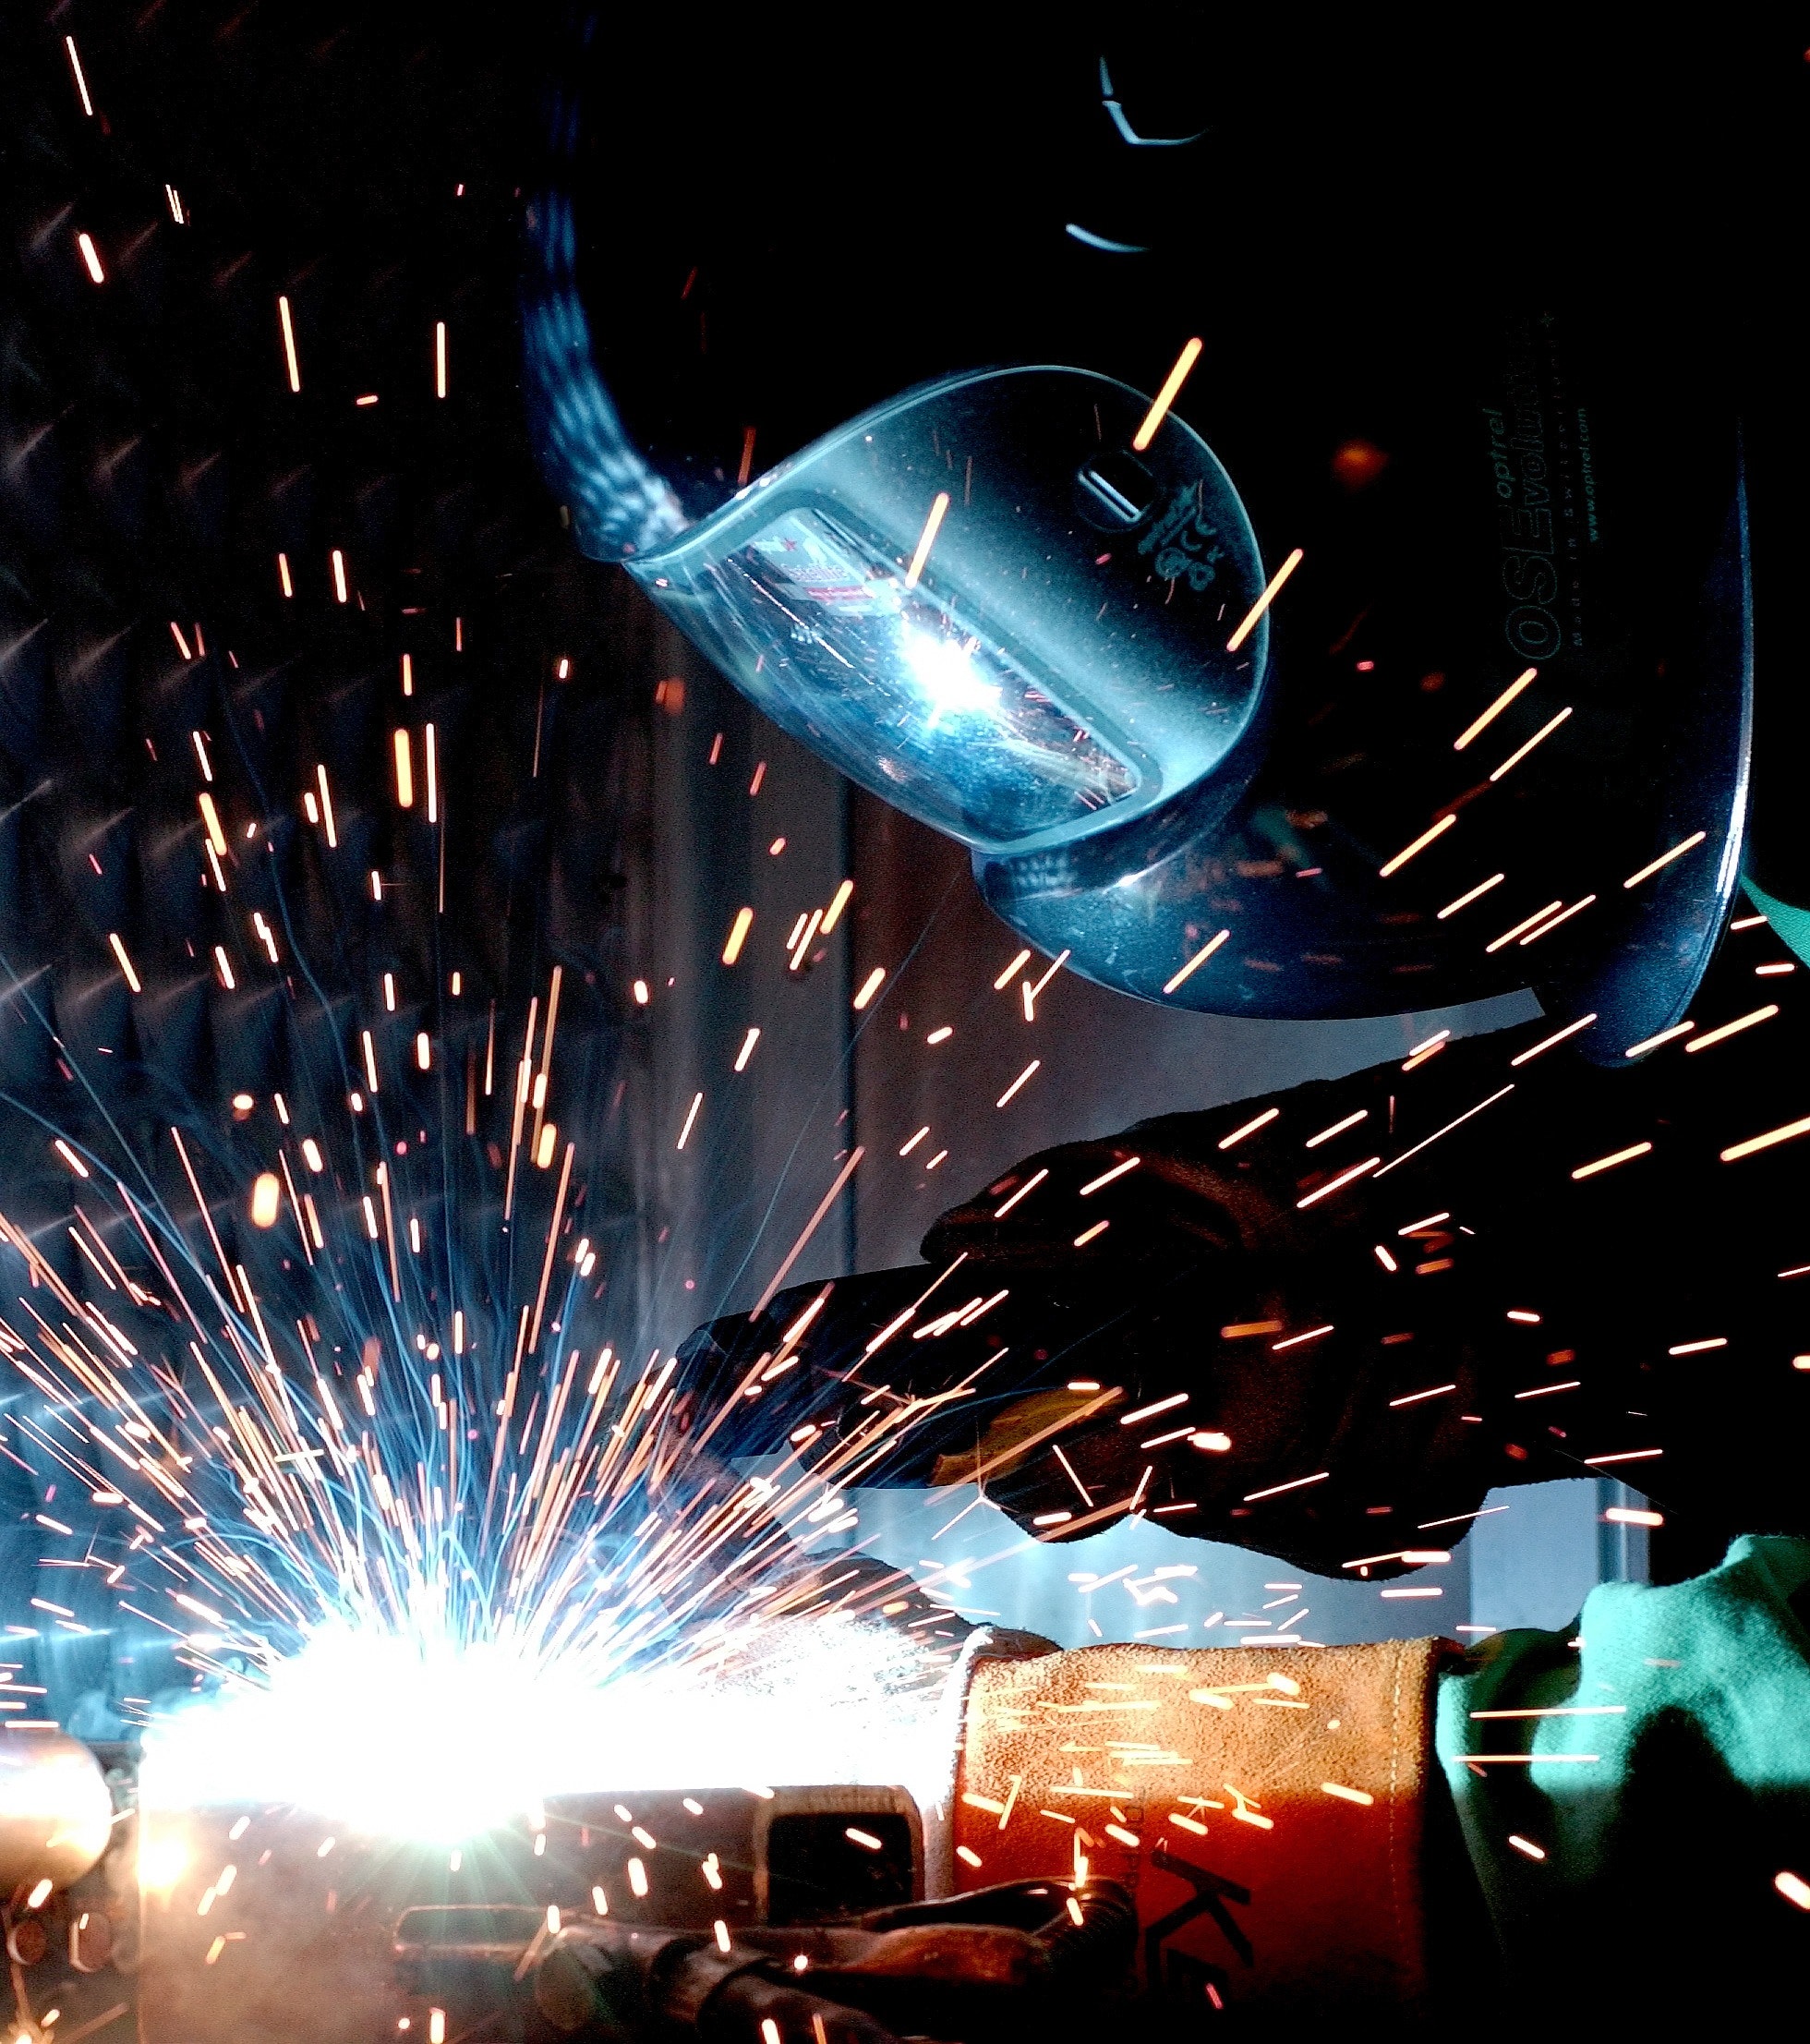 A person welding image